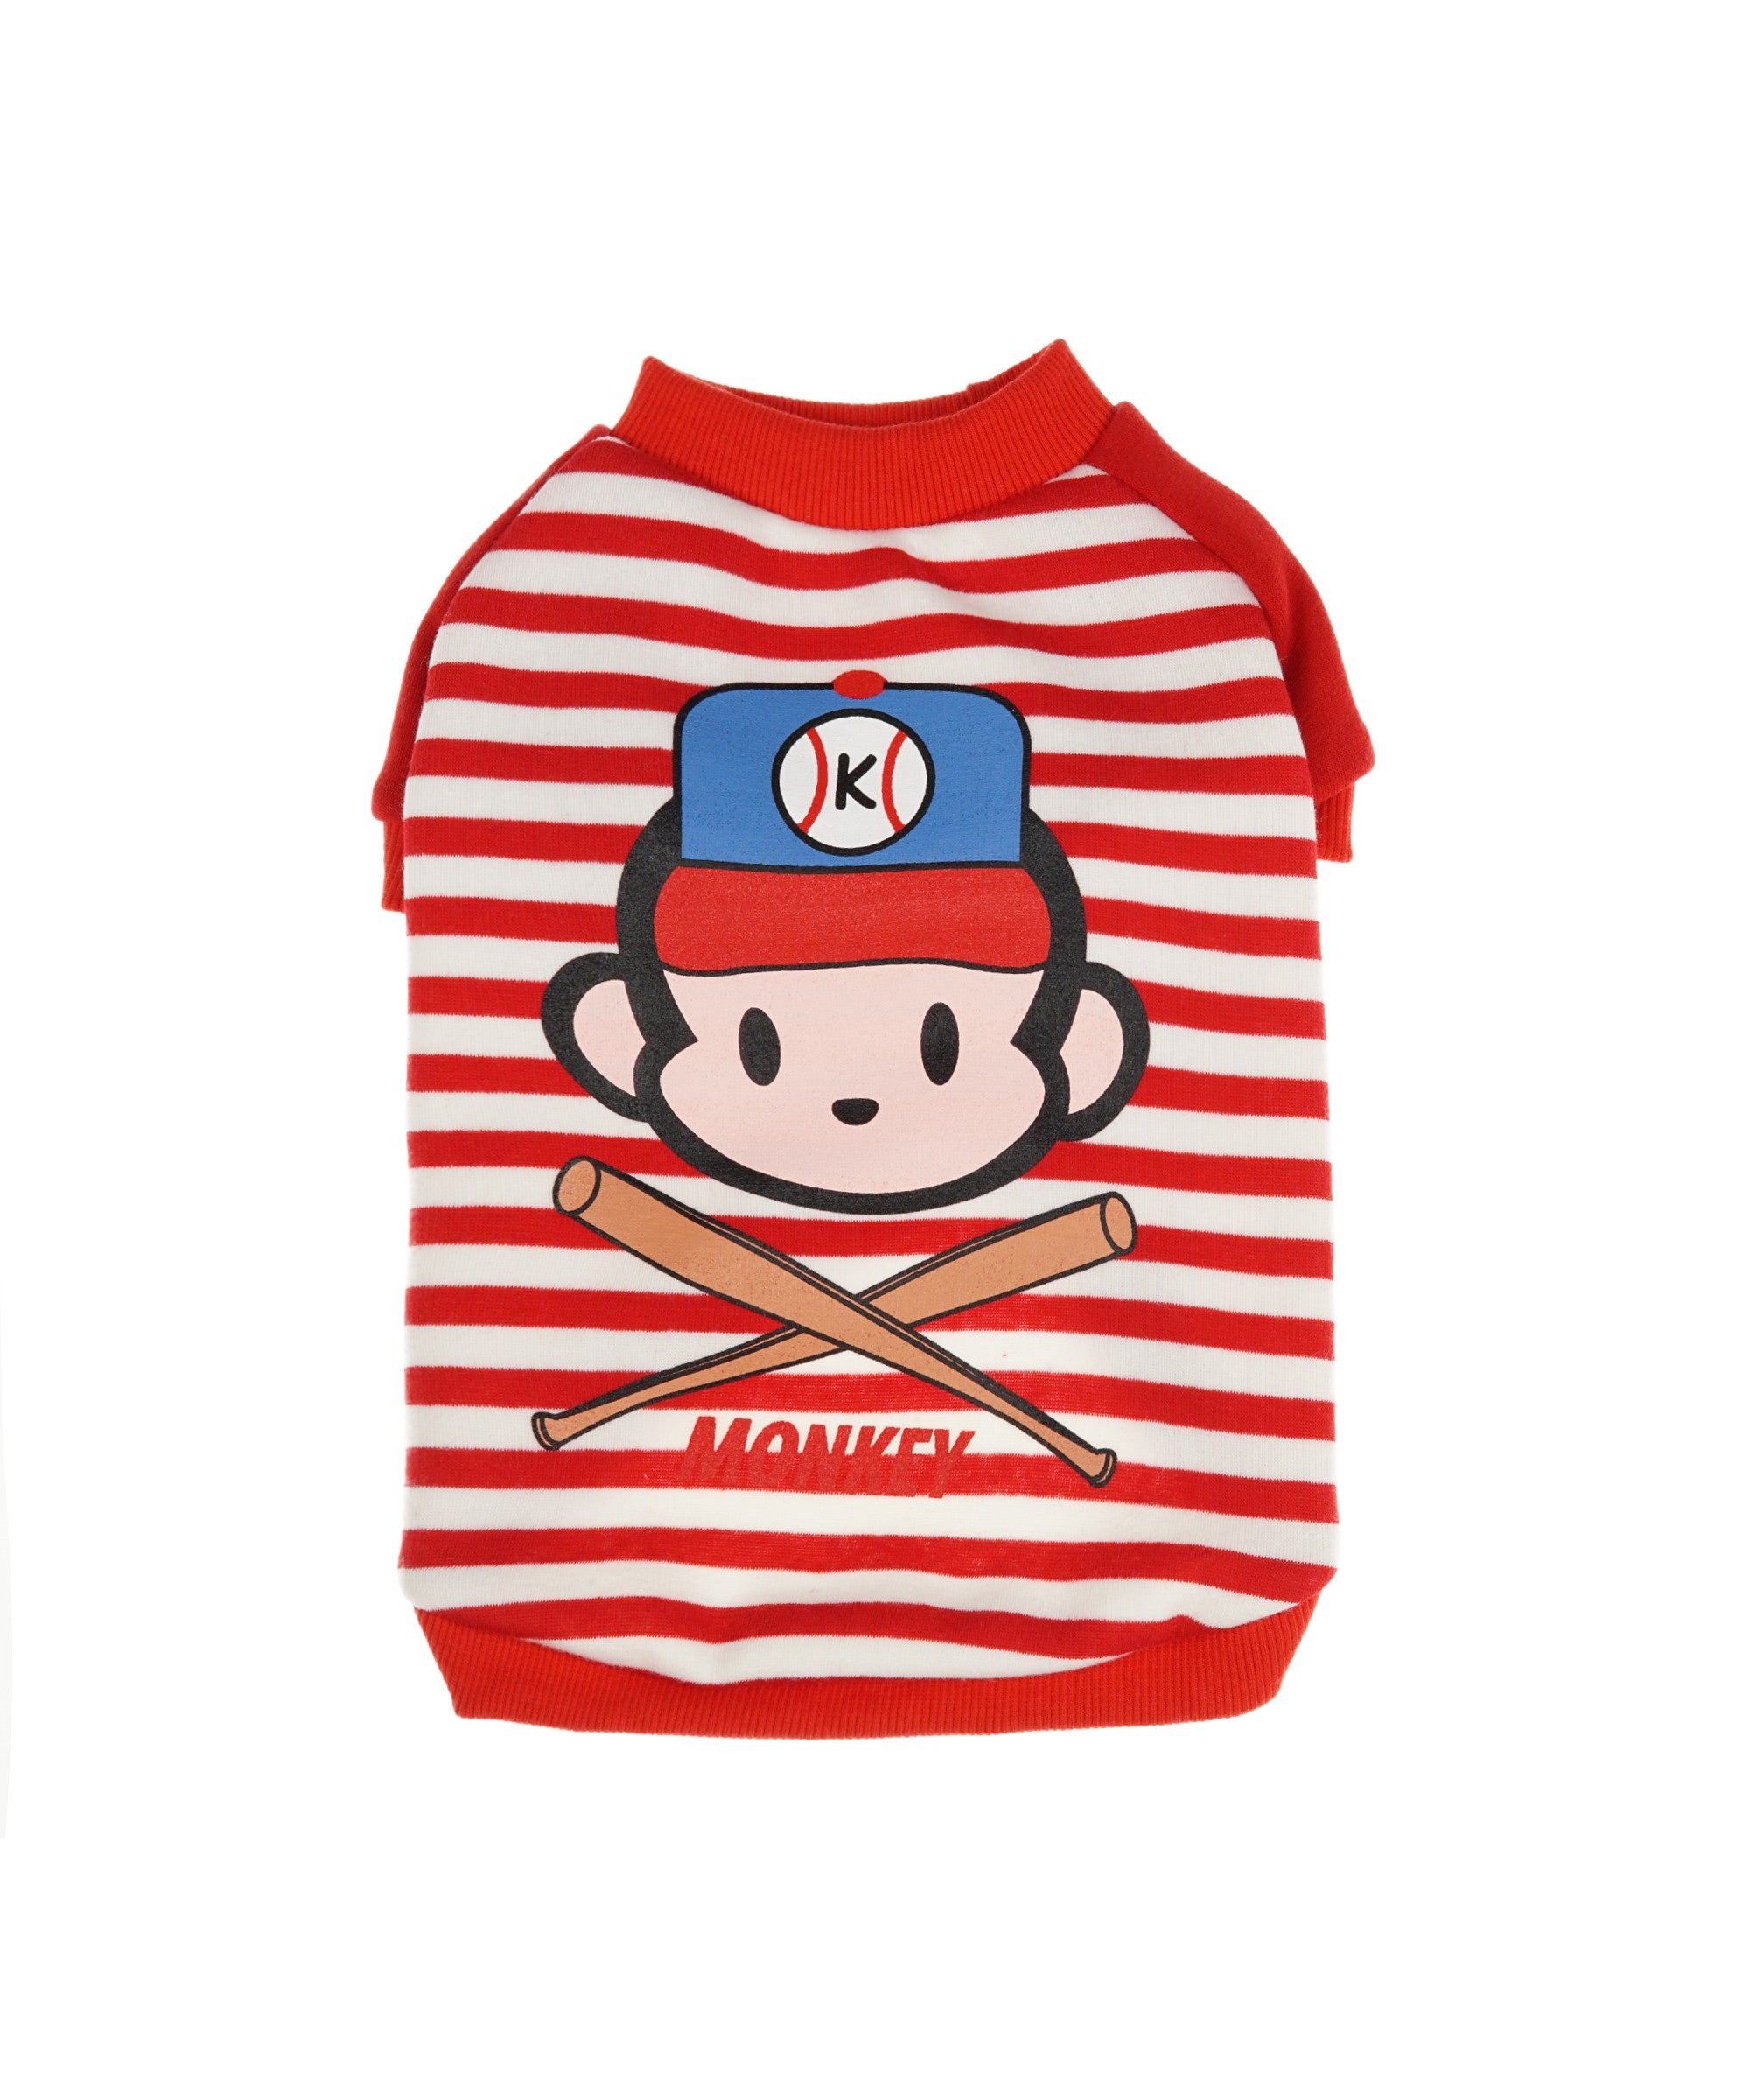 Striped Monkey Shirt For Dogs in Red L